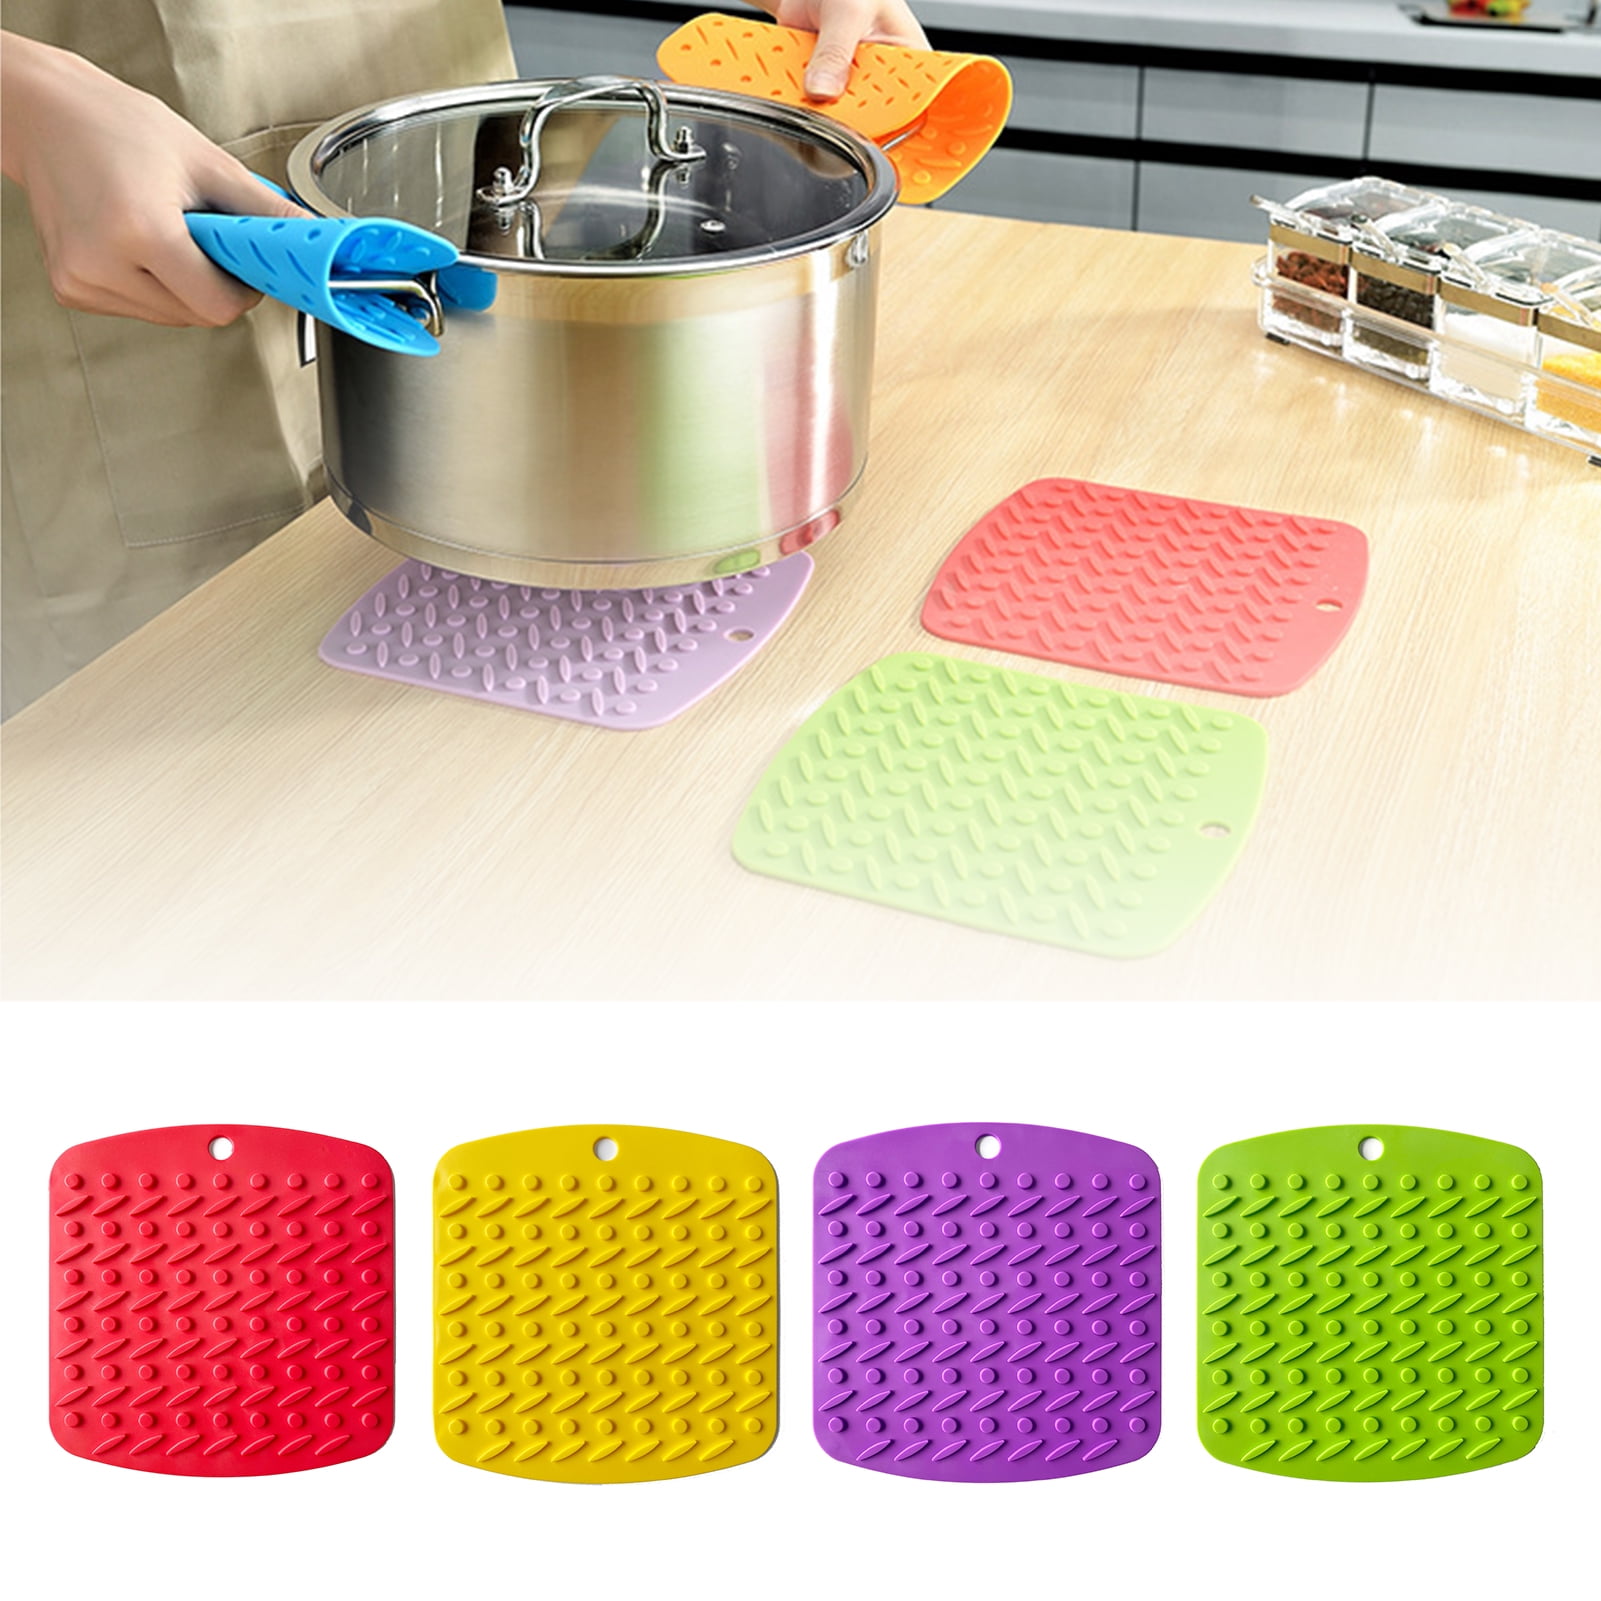 Heat Resistant Pot Holder Stainless Steel Hot Pan Stand Anti-Slip Rack Food  Placemat Organizer Table Mat Container Countertop